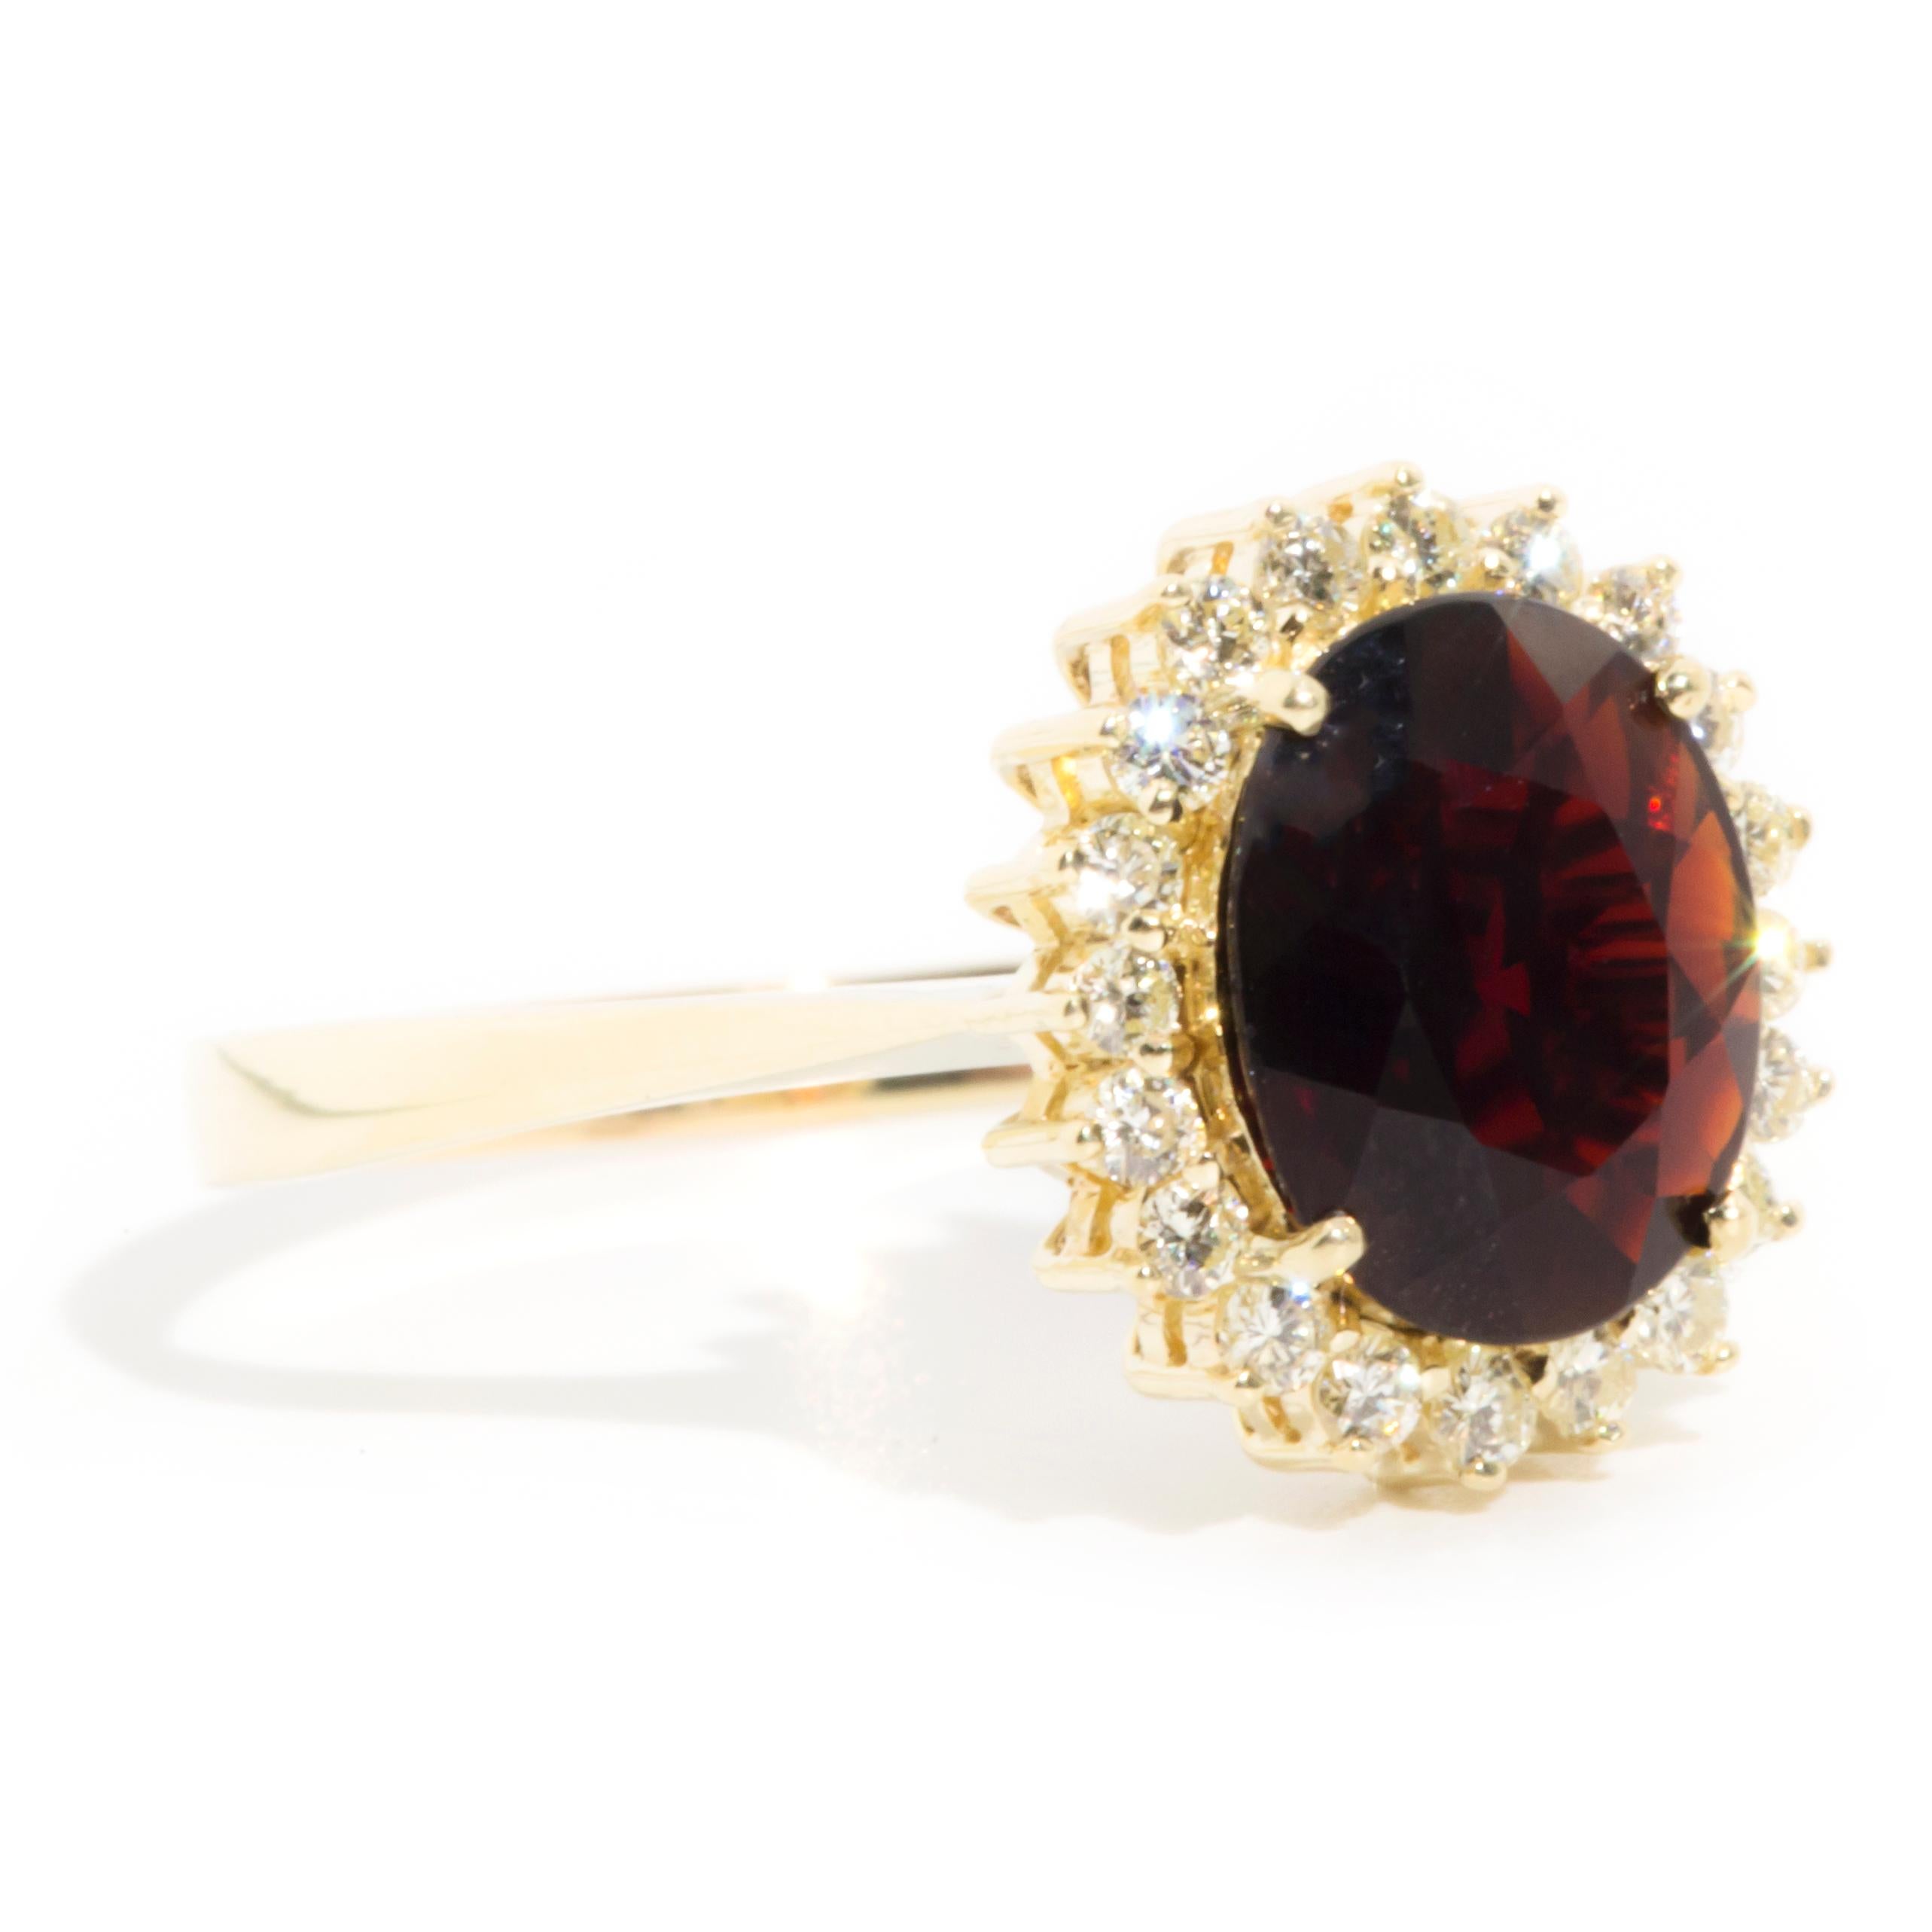 Women's Oval Red Garnet and Diamond Vintage Halo Cluster Ring in 14 Carat Yellow Gold